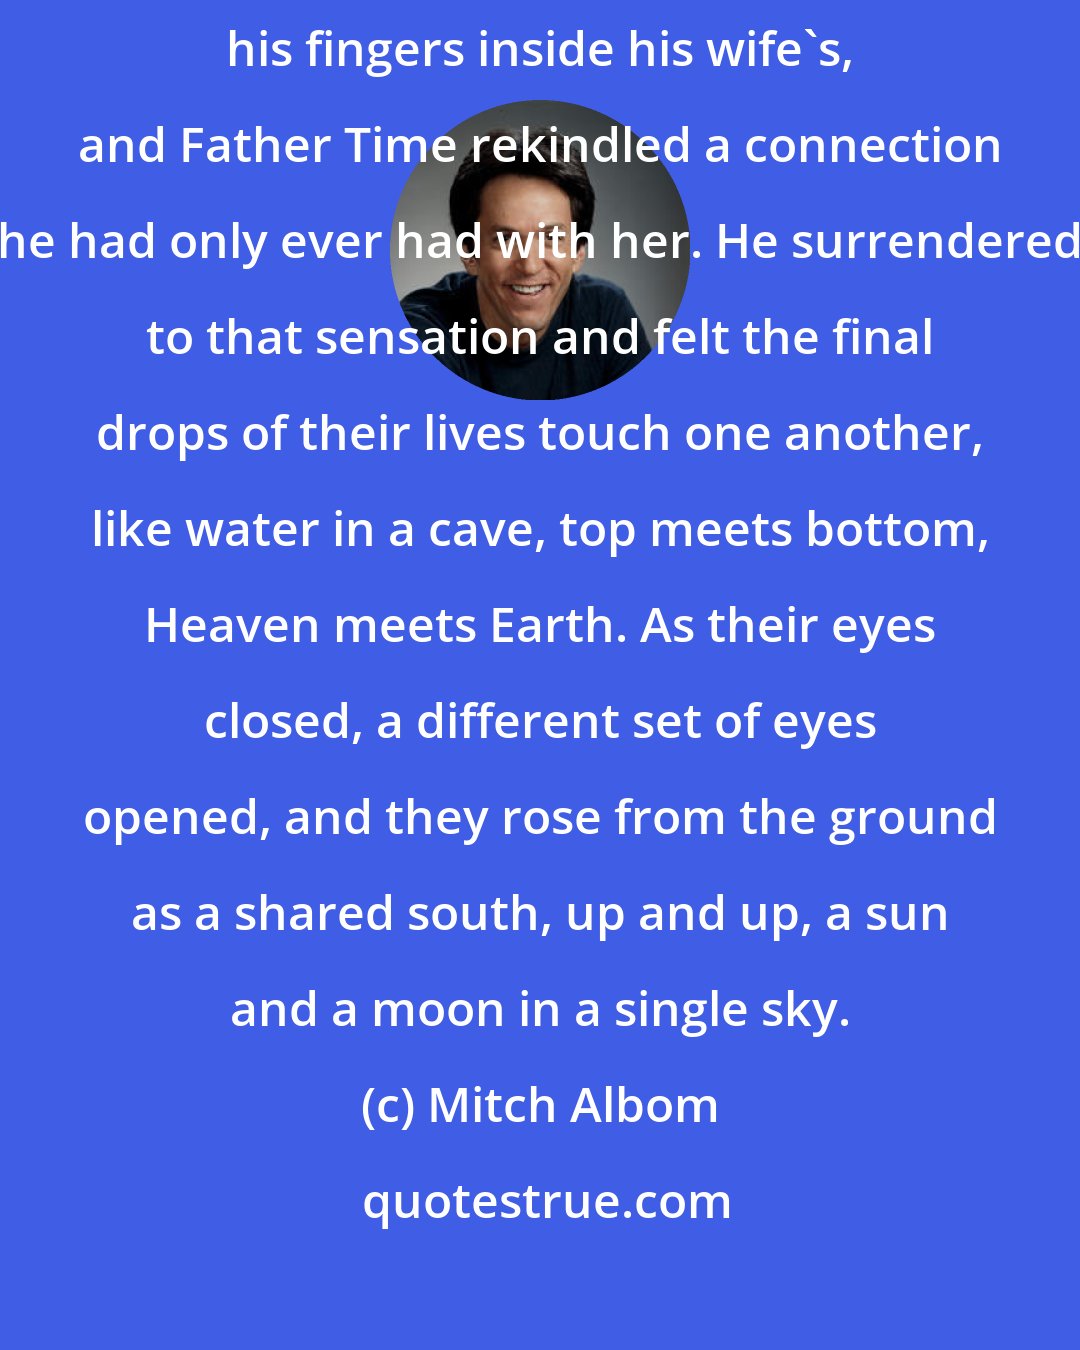 Mitch Albom: A wind blew, and the sand around his drawing scattered. He wrapped his fingers inside his wife's, and Father Time rekindled a connection he had only ever had with her. He surrendered to that sensation and felt the final drops of their lives touch one another, like water in a cave, top meets bottom, Heaven meets Earth. As their eyes closed, a different set of eyes opened, and they rose from the ground as a shared south, up and up, a sun and a moon in a single sky.